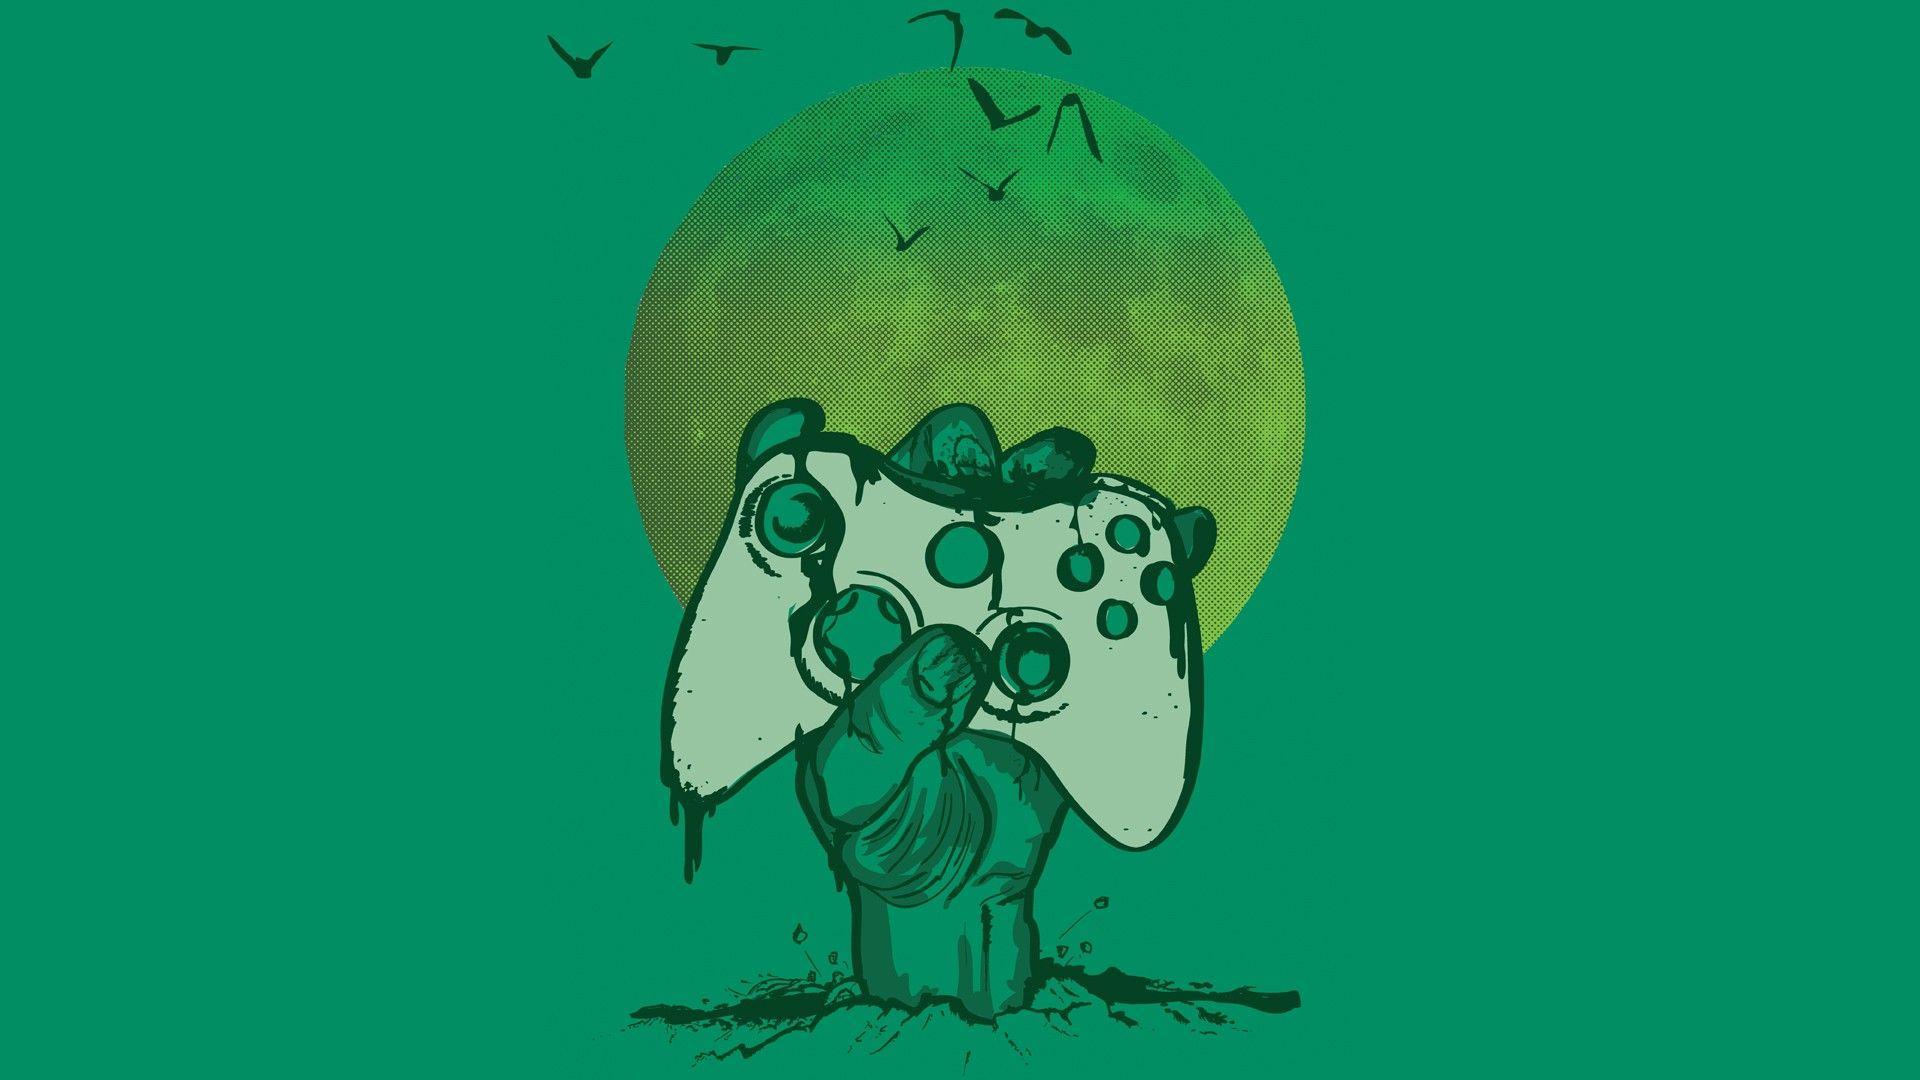 Gaming Cool Xbox Wallpapers